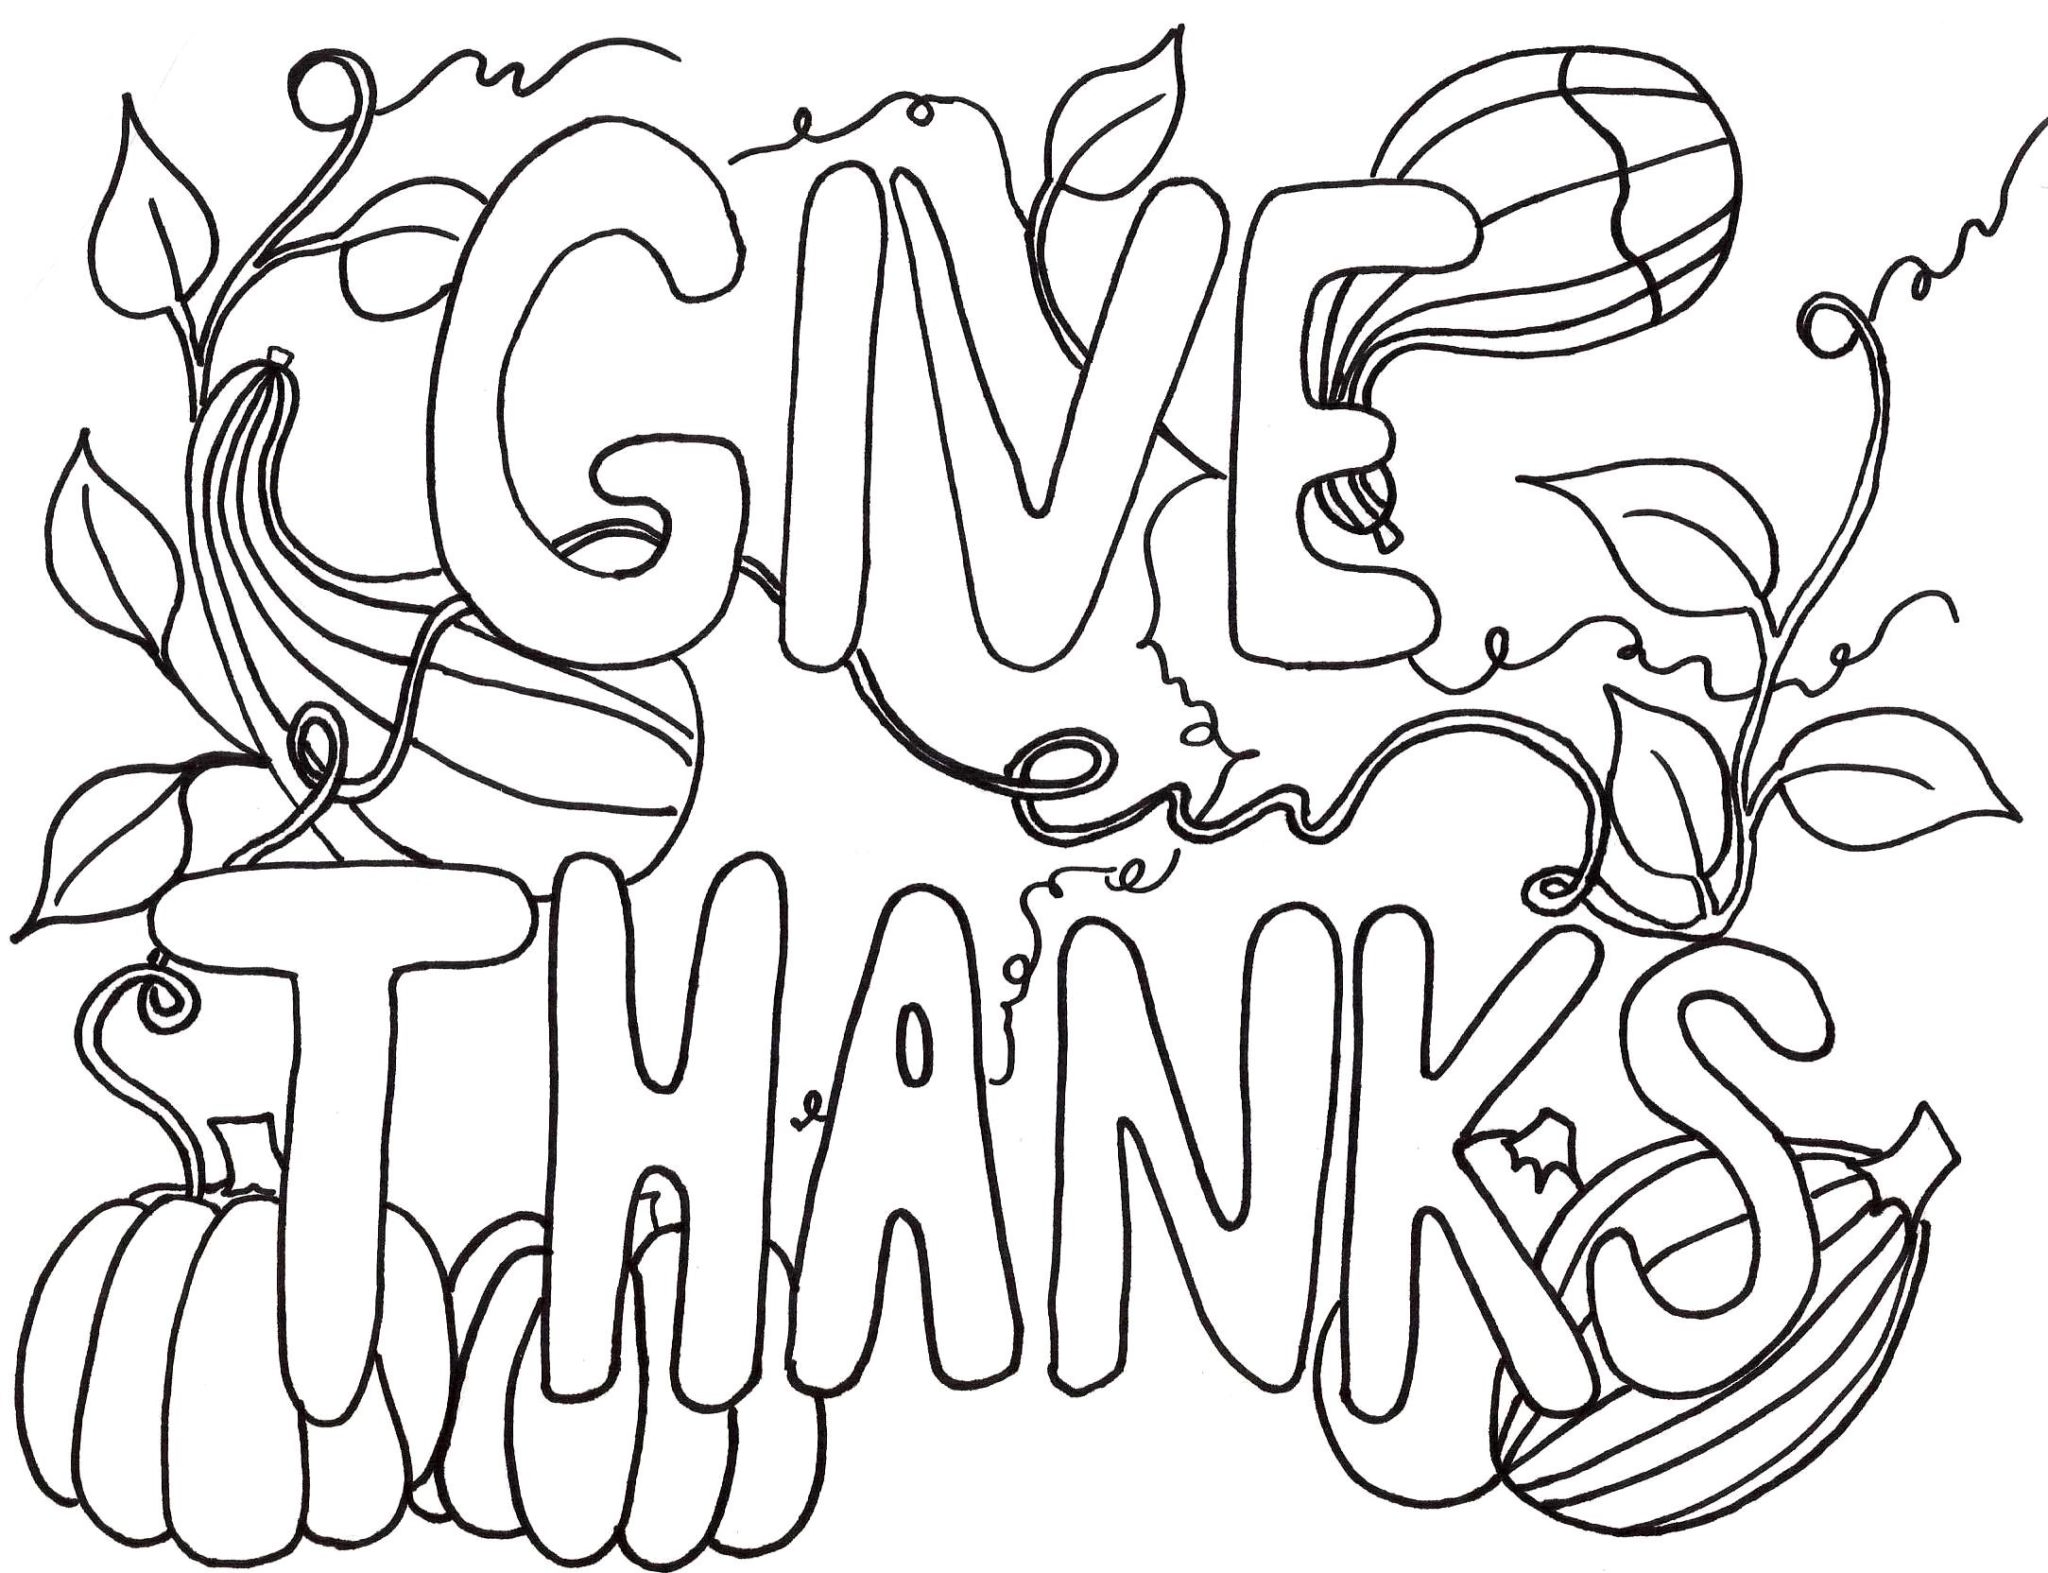 Download Thanksgiving Coloring Pages for Adults - Best Coloring Pages For Kids